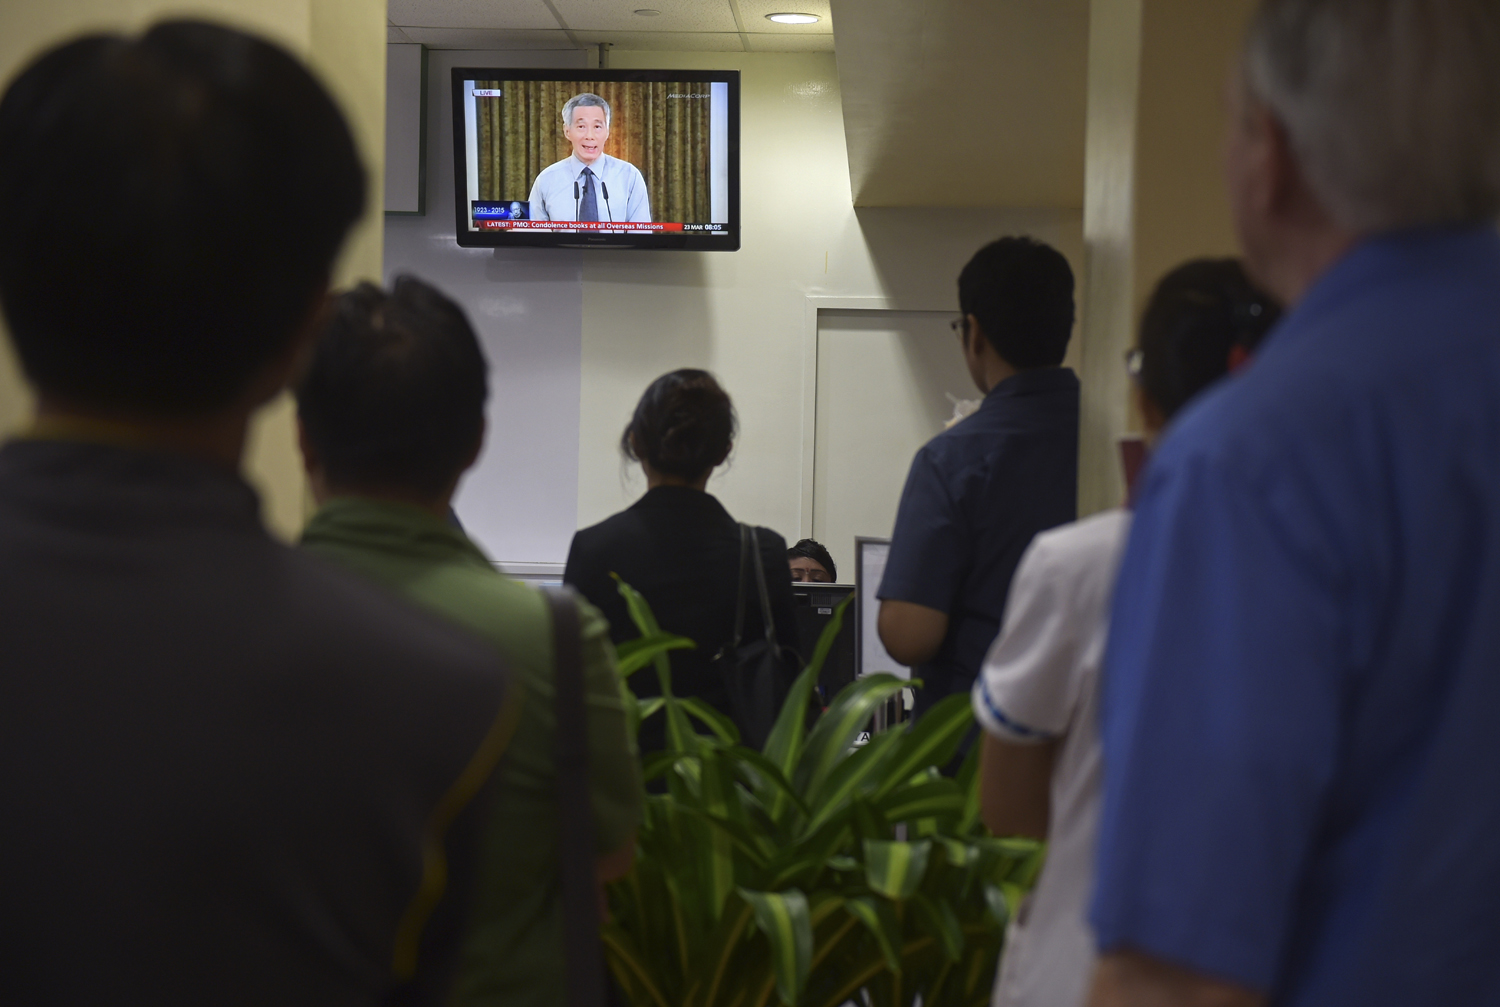 A live broadcast by Singaporean Prime Minister Lee Hsien Loong on the death of his father is watched in a reception area at a hospital where the city-state's first Prime Minister Lee Kuan Yew passed away on March 23, 2015, in Singapore (Joseph Nair — AP)